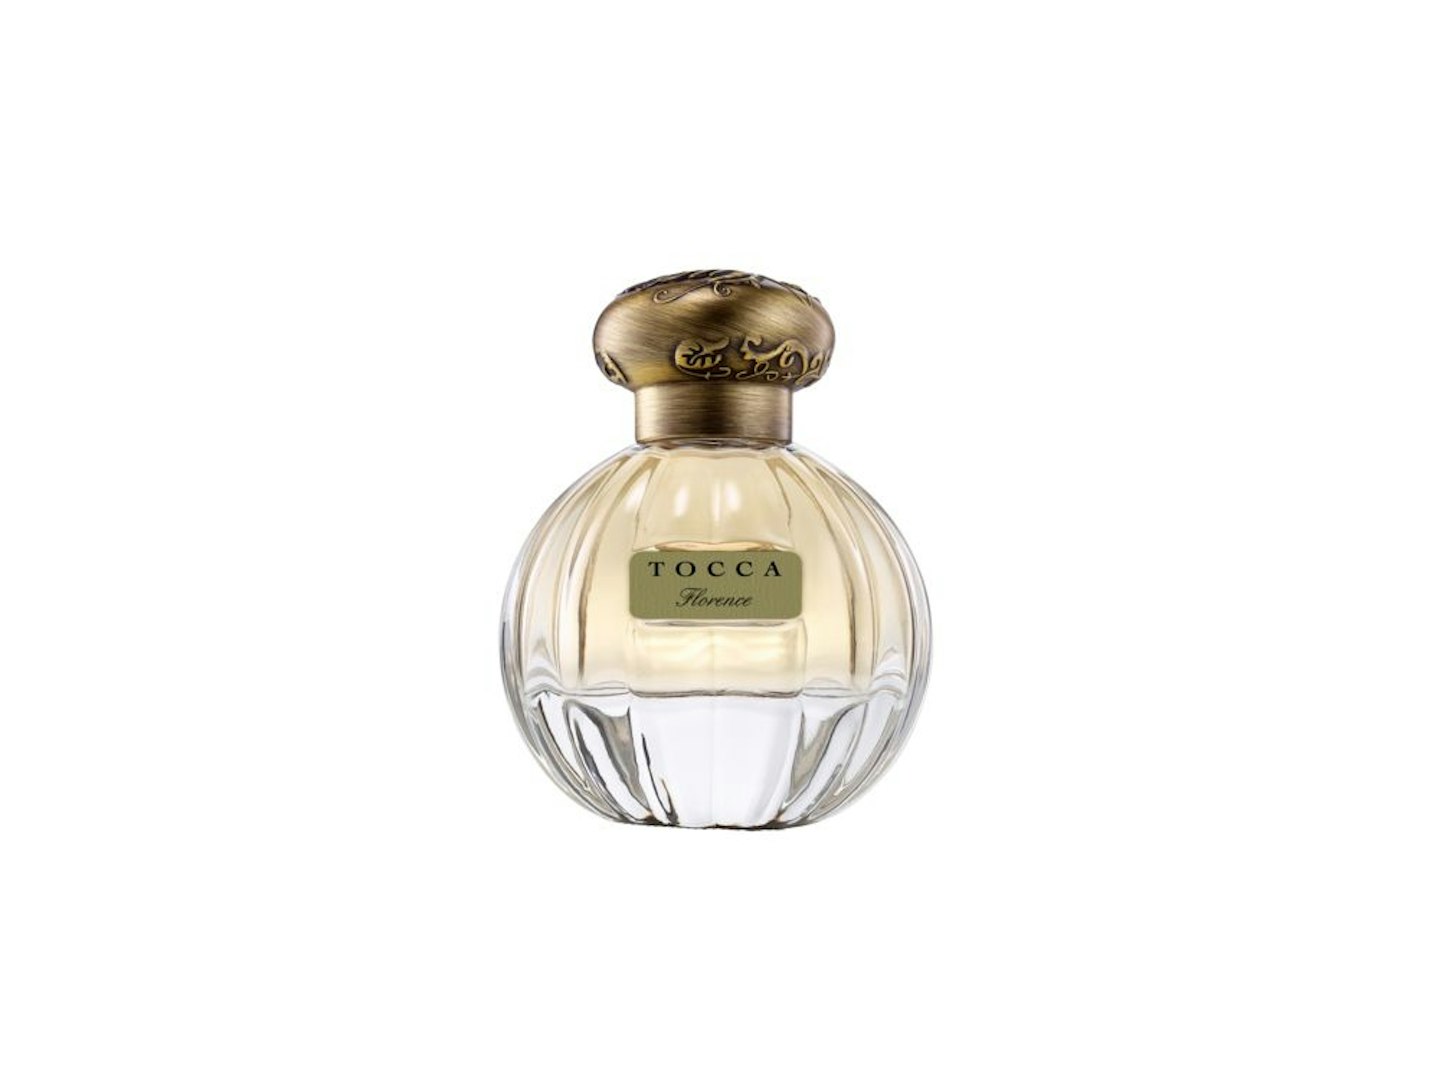 Tocca Florence EDP, £68 for 50ml